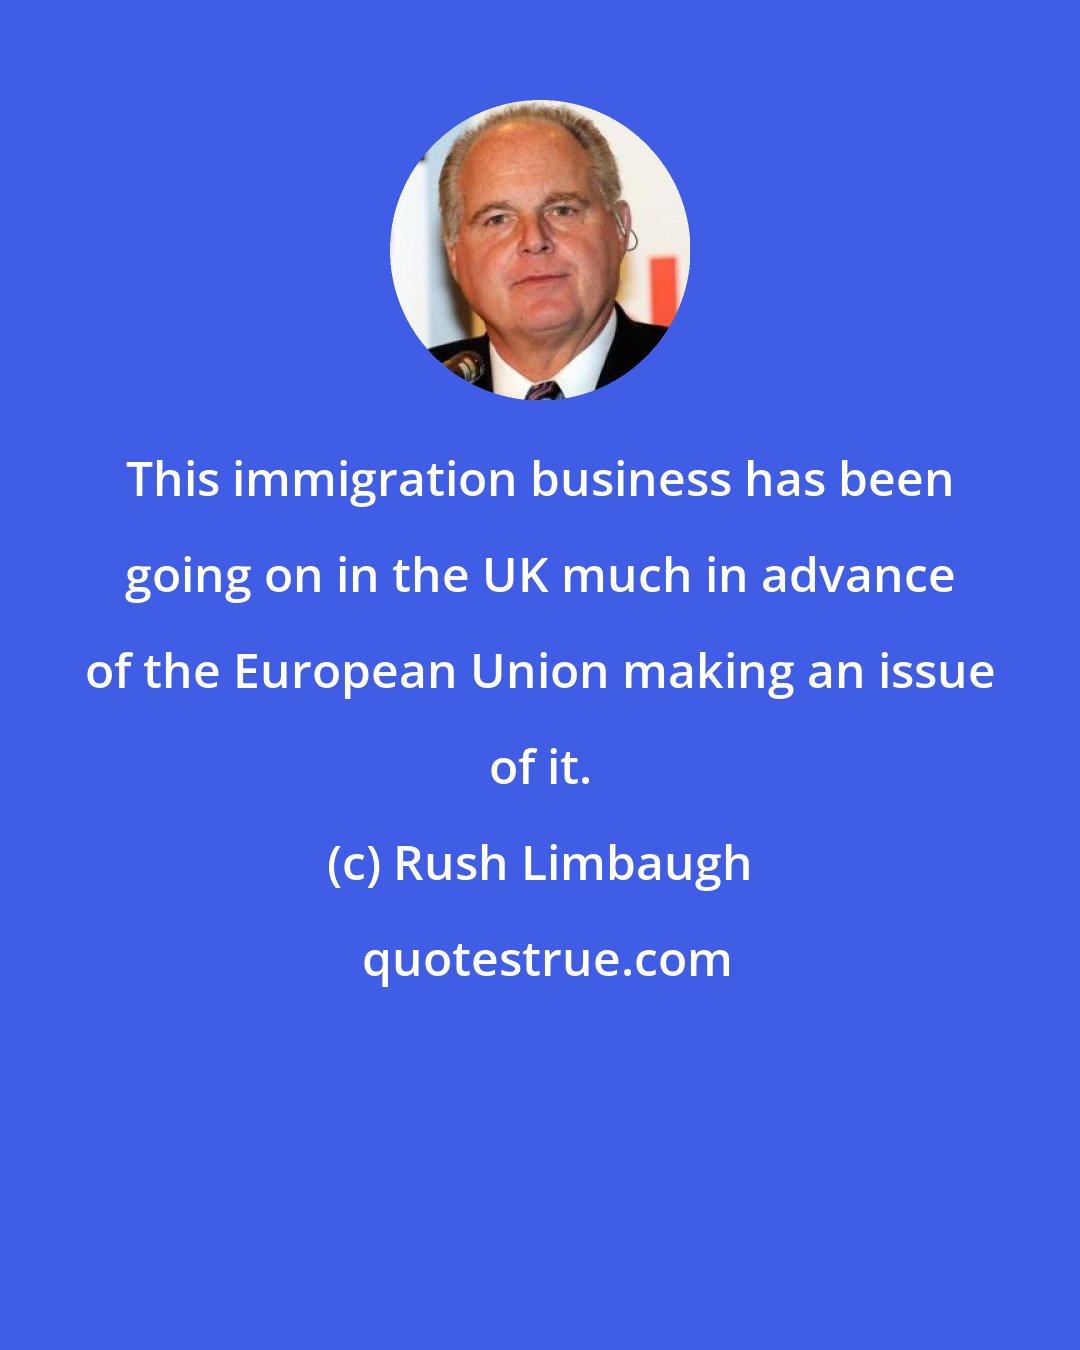 Rush Limbaugh: This immigration business has been going on in the UK much in advance of the European Union making an issue of it.